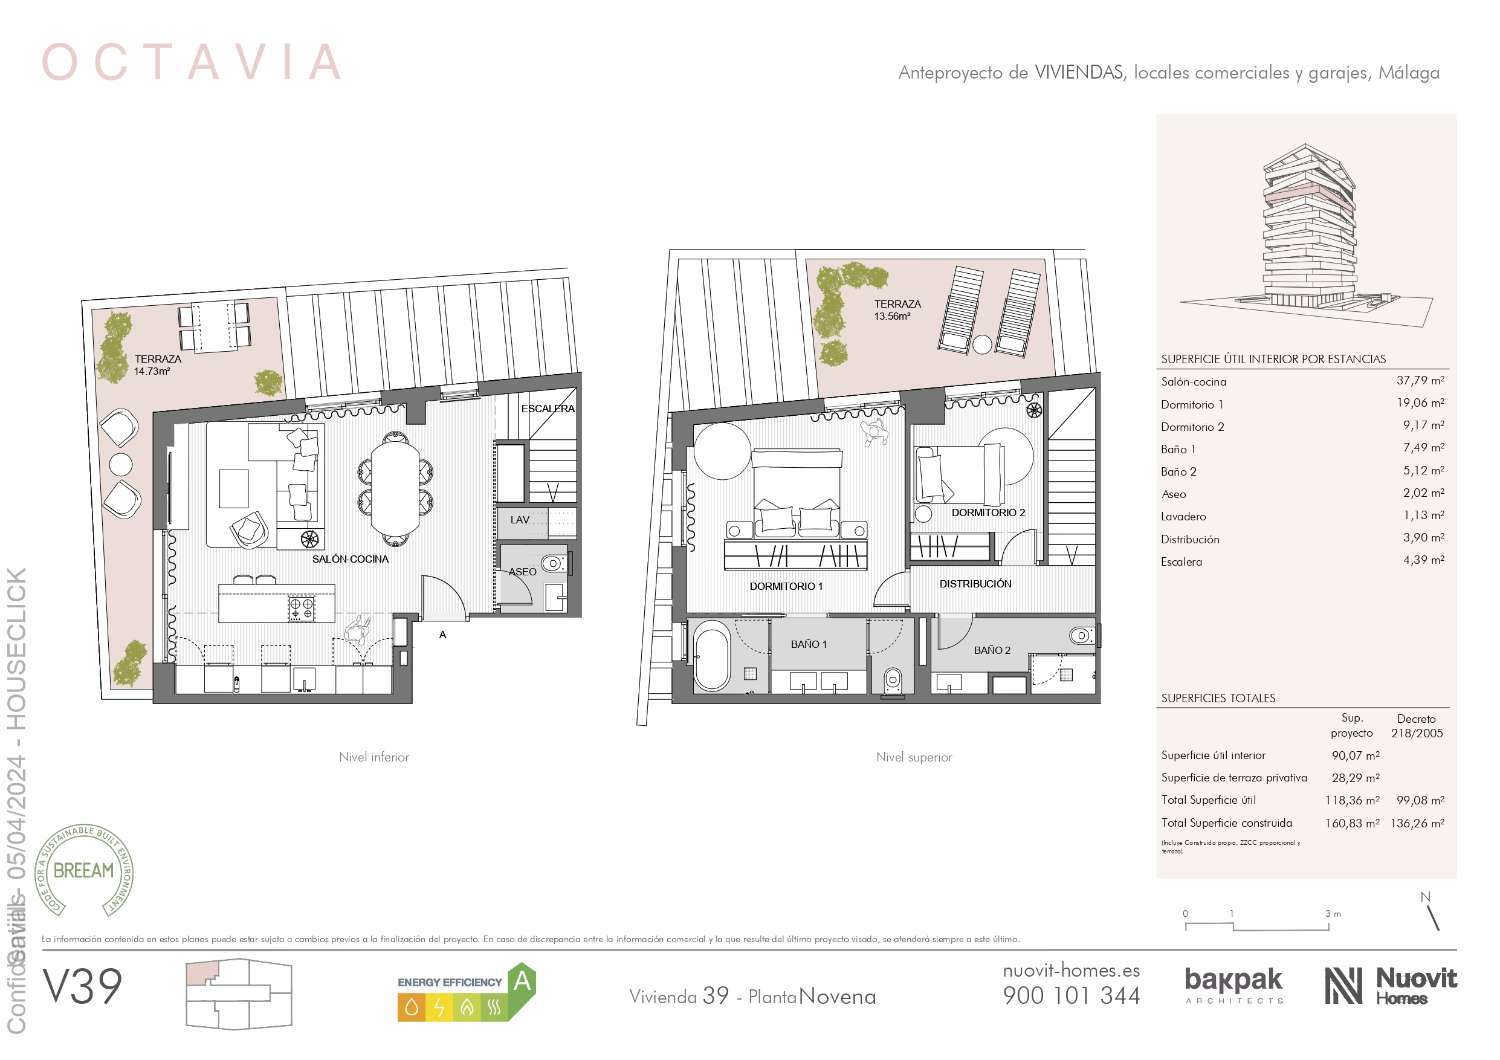 BRAND NEW LUXURY 2 BEDROOM DUPLEX WITH SEA VIEWS LAST 2 UNITS! From €1,845,000